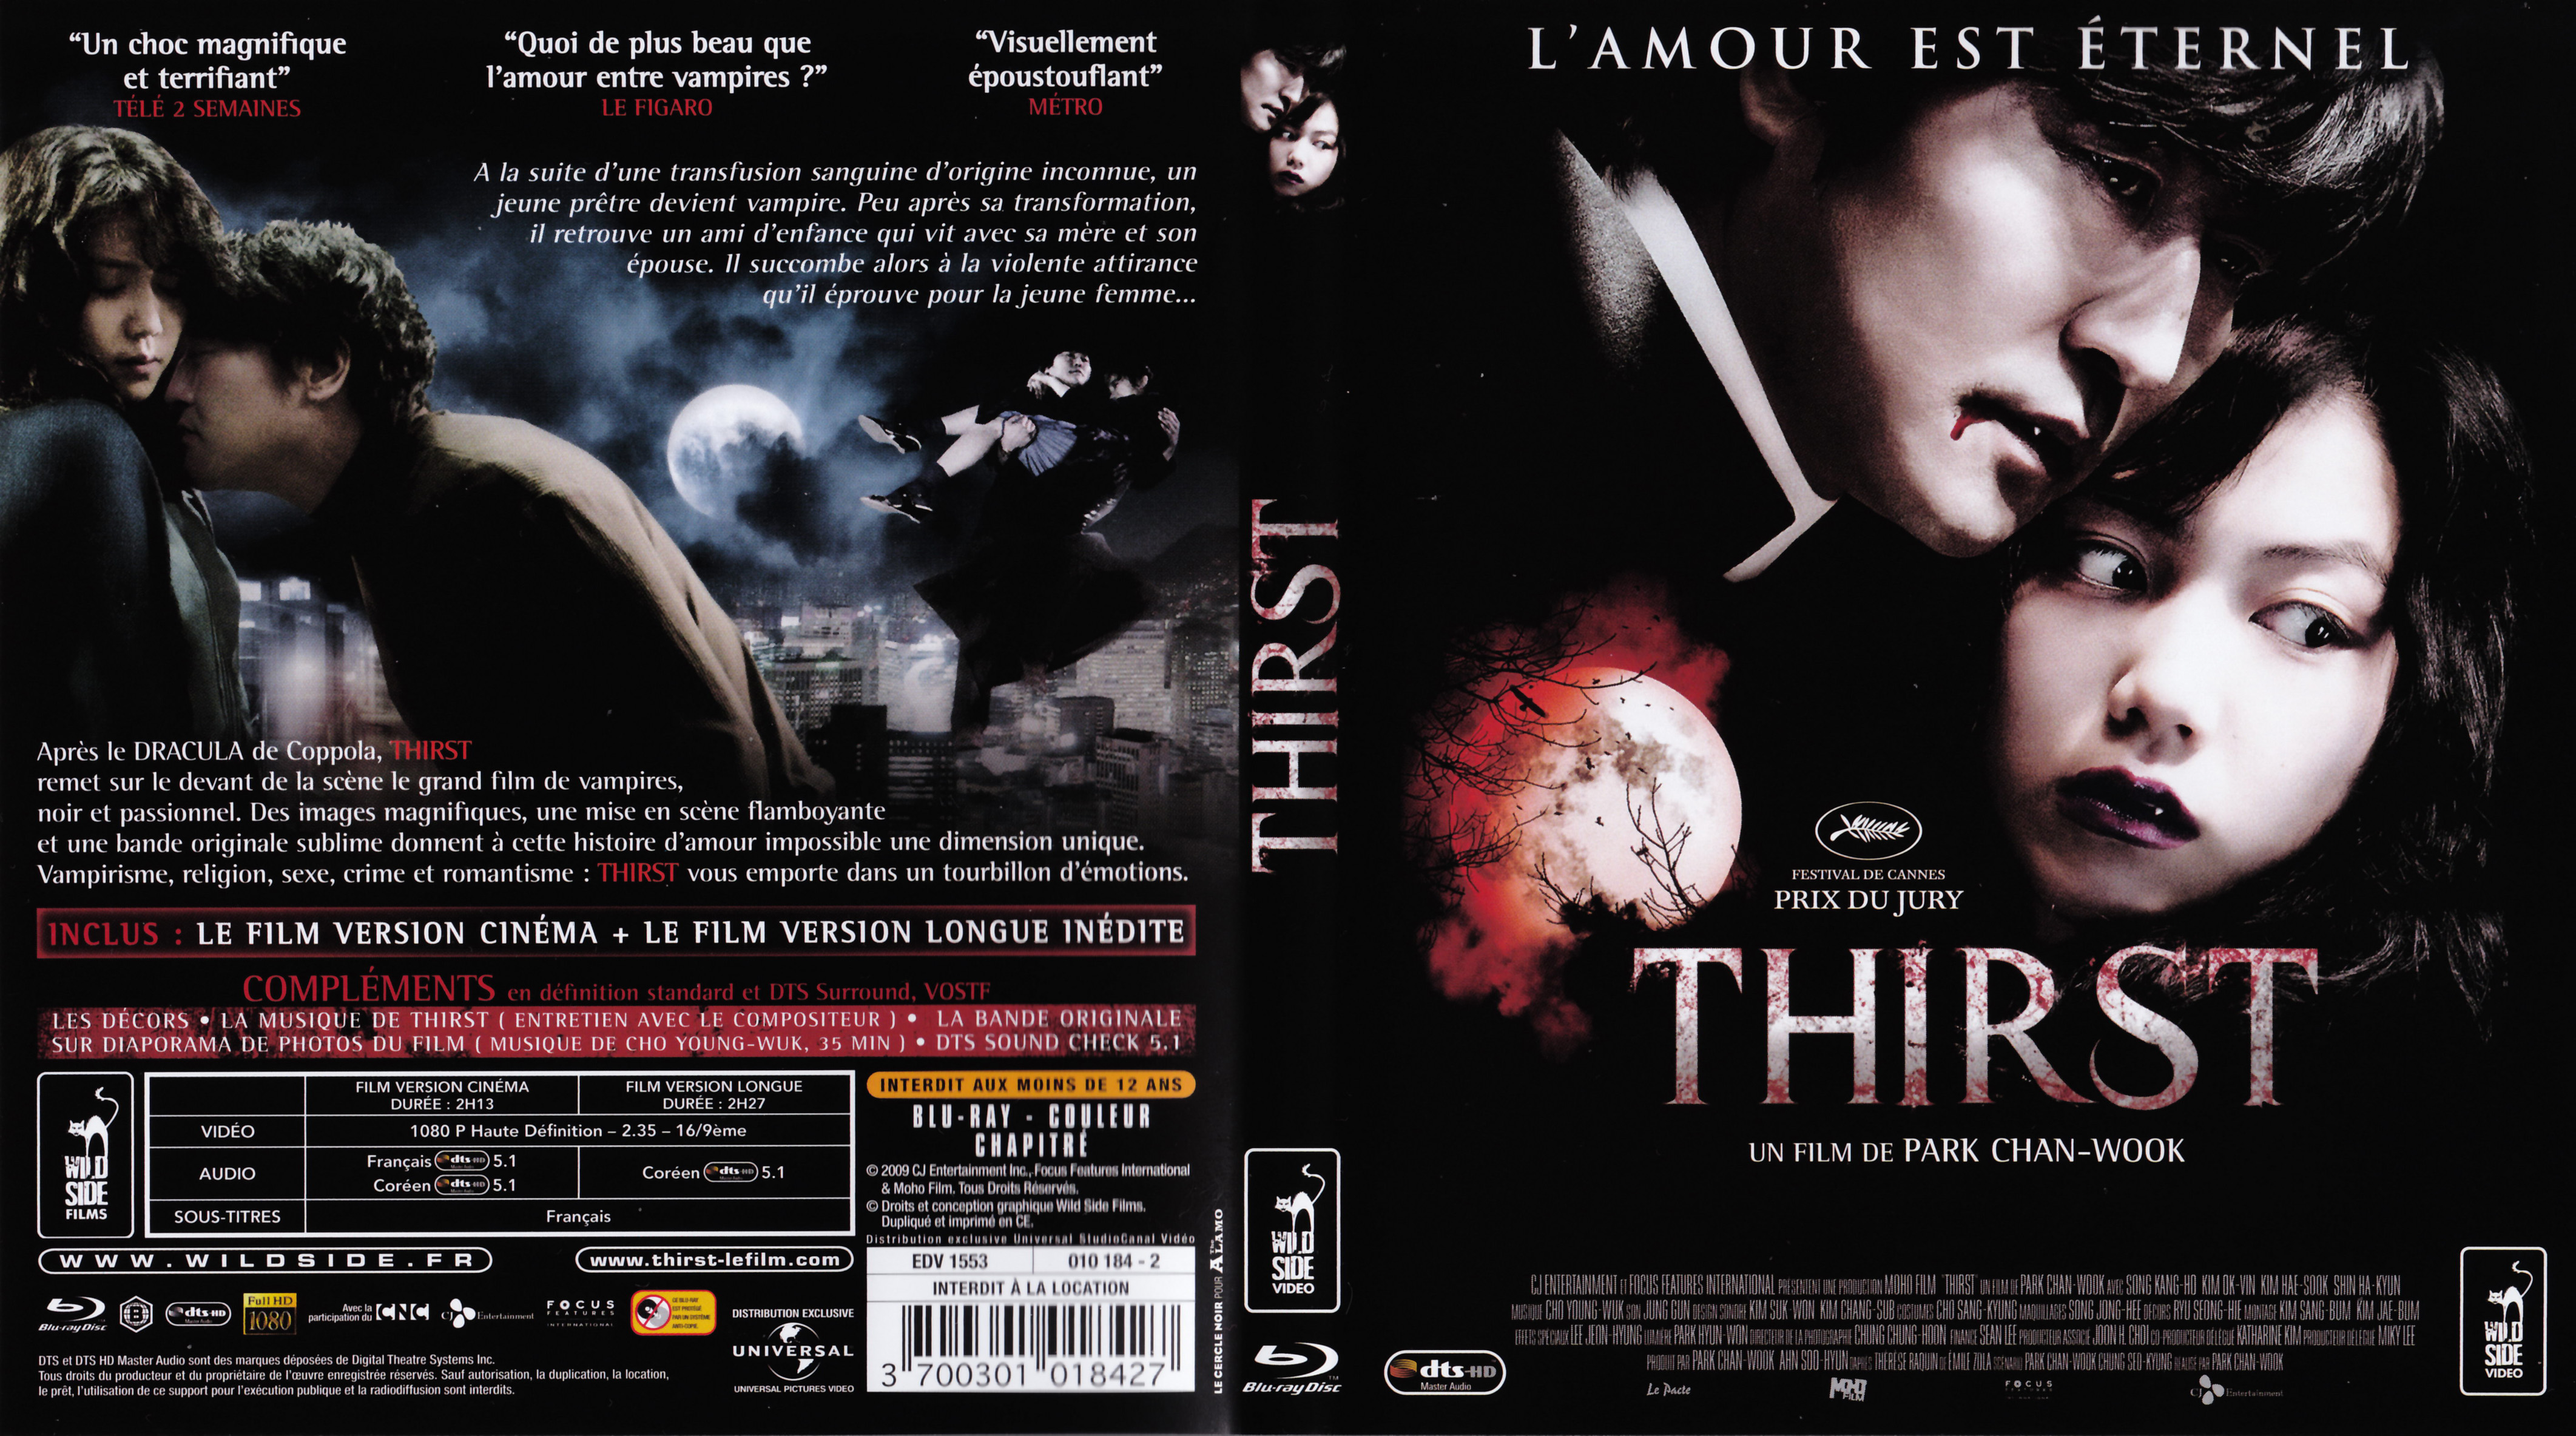 Jaquette DVD Thirst (BLU-RAY)